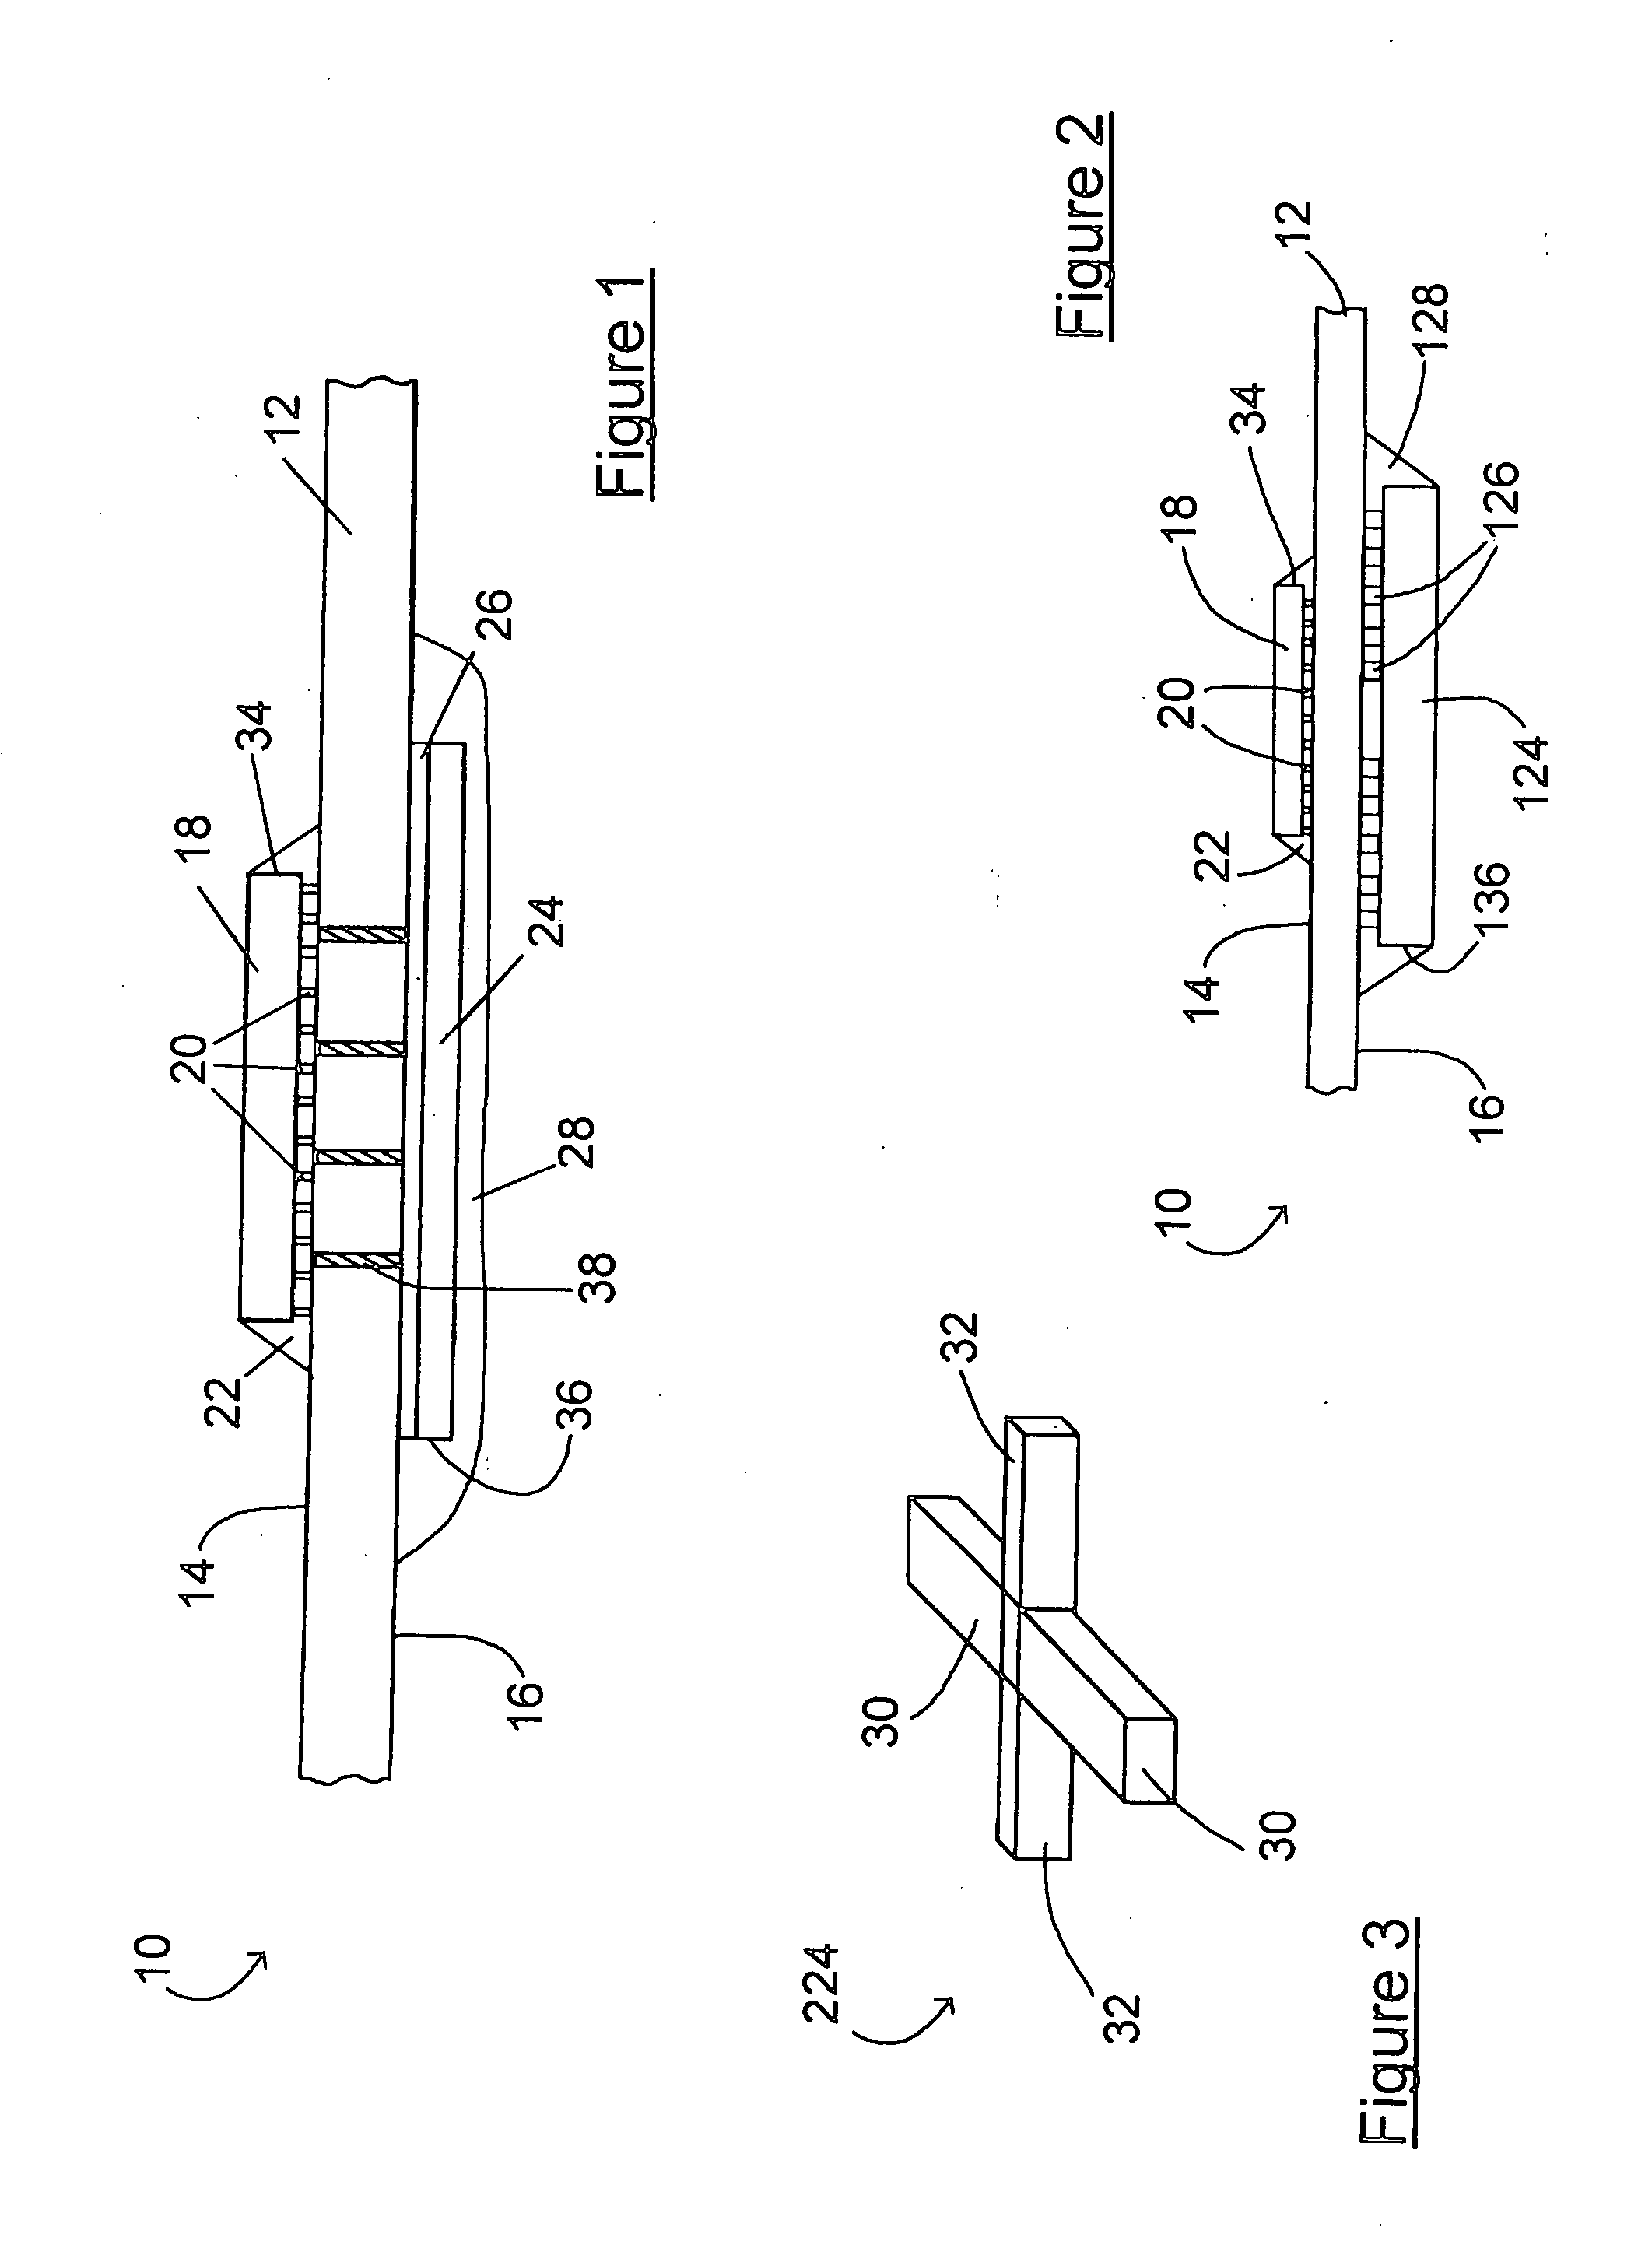 Circuit board with localized stiffener for enhanced circuit component reliability